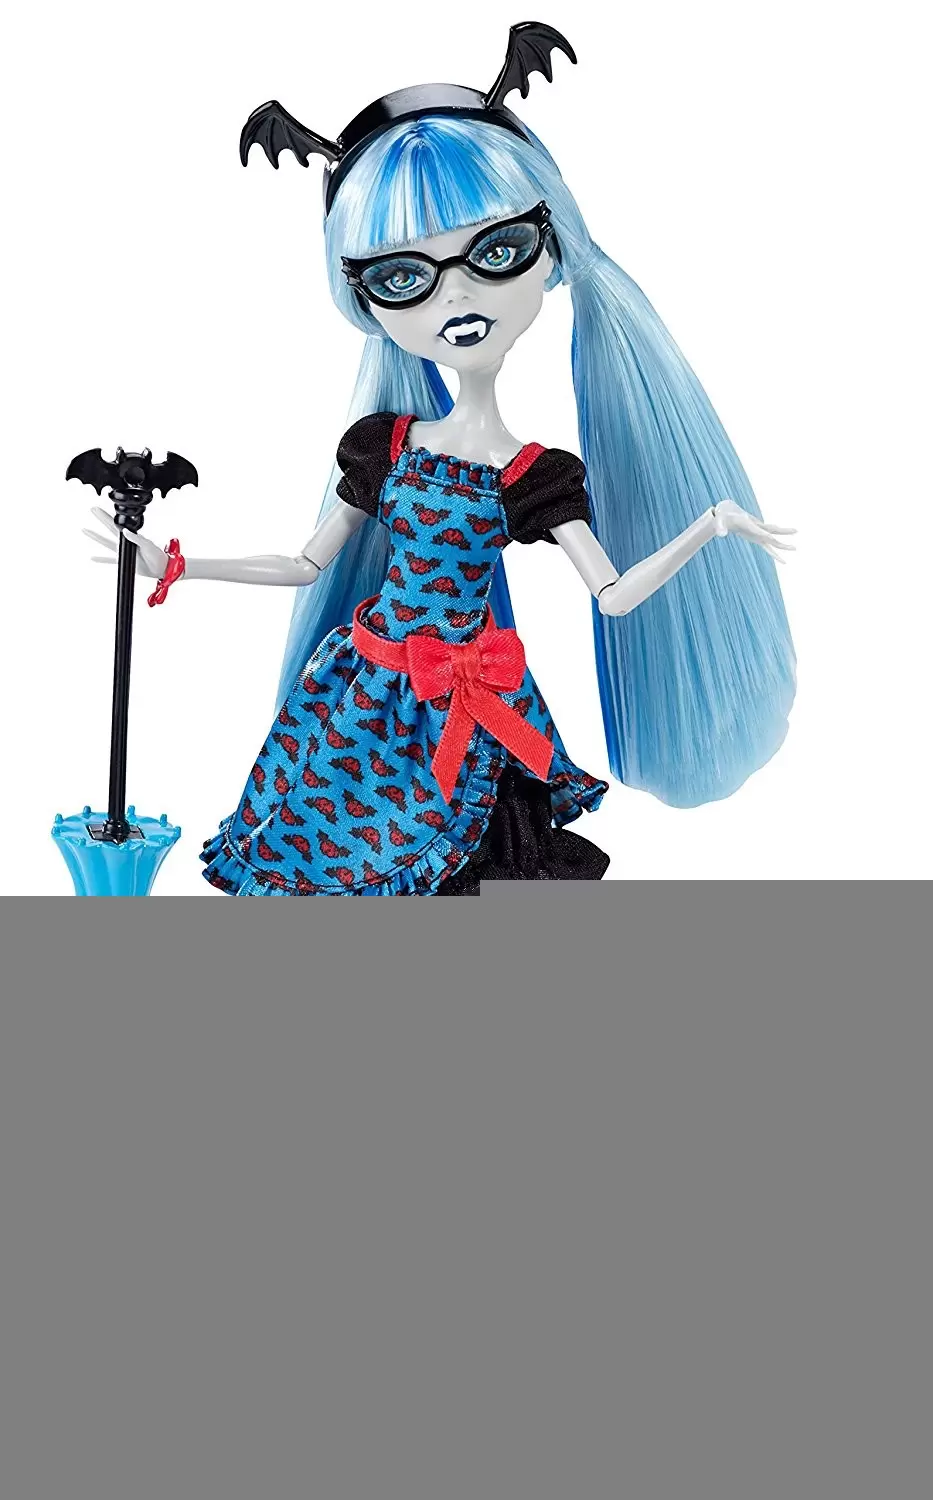 Monster High - Ghoulia Yelps - Freaky Fusion